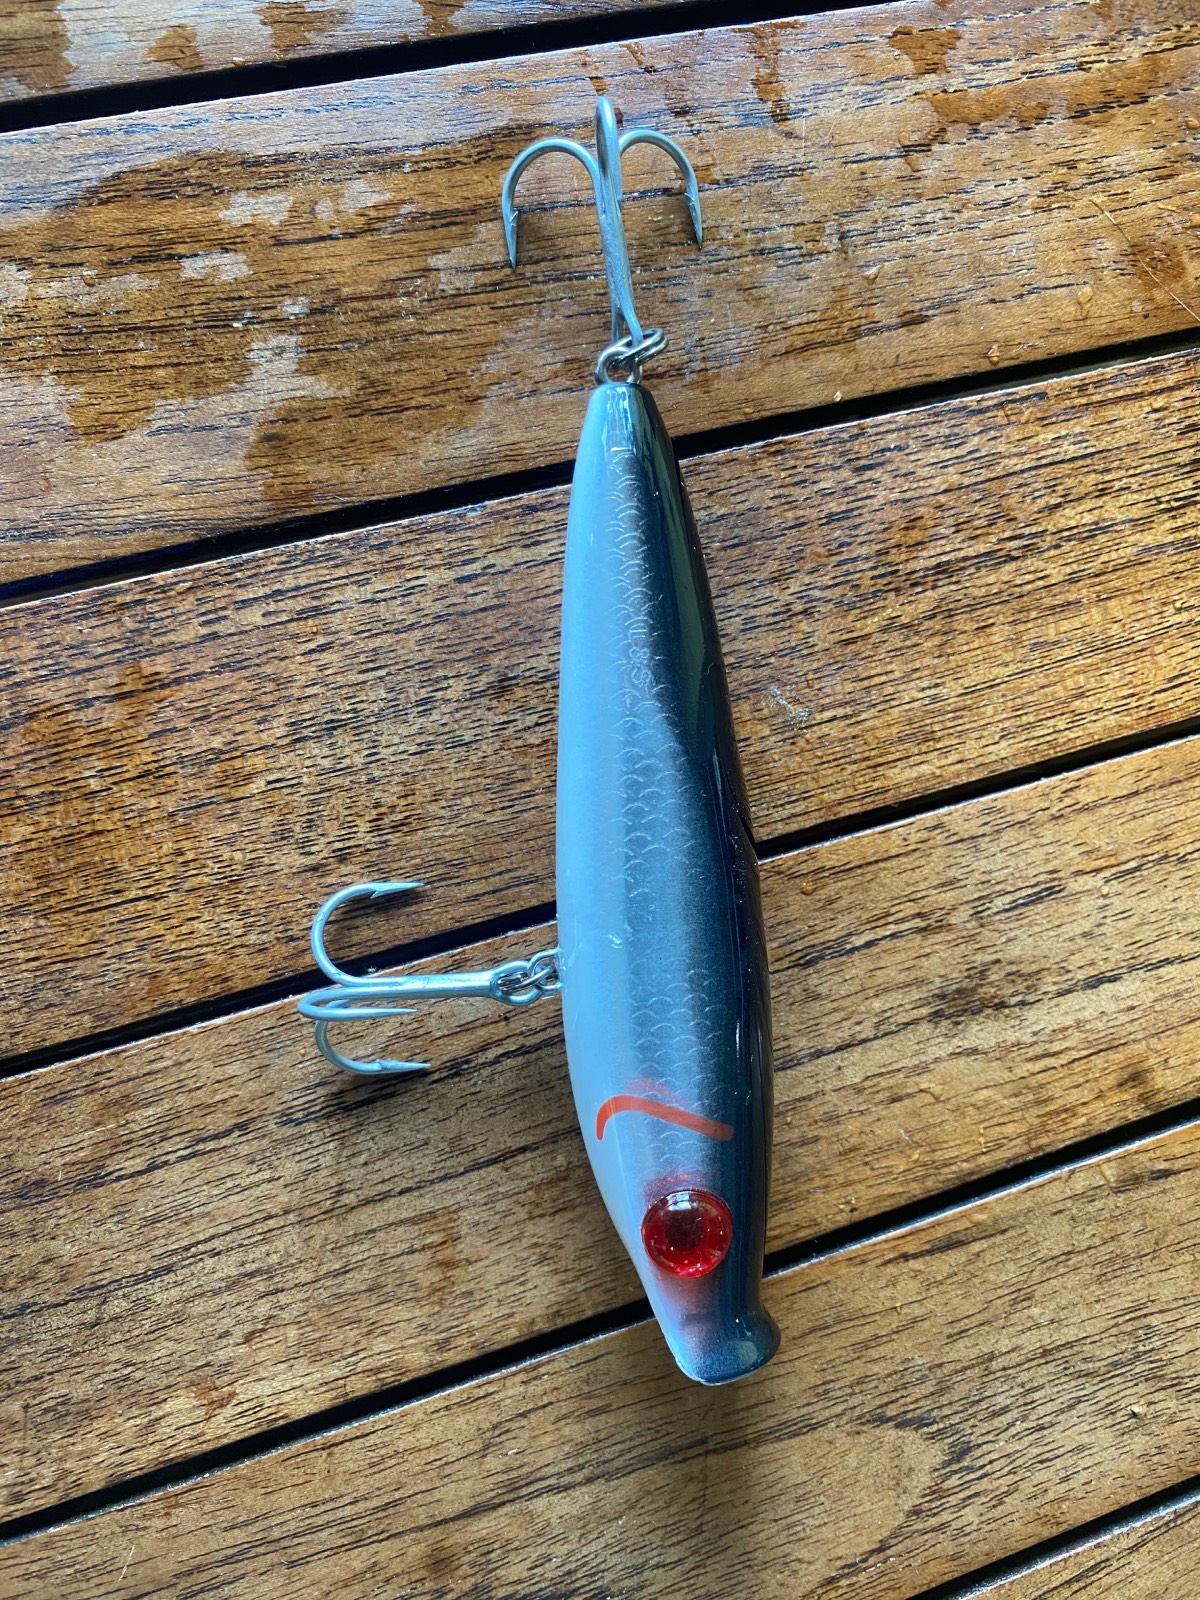 Using Topwater Baits for Speckled Trout Fishing